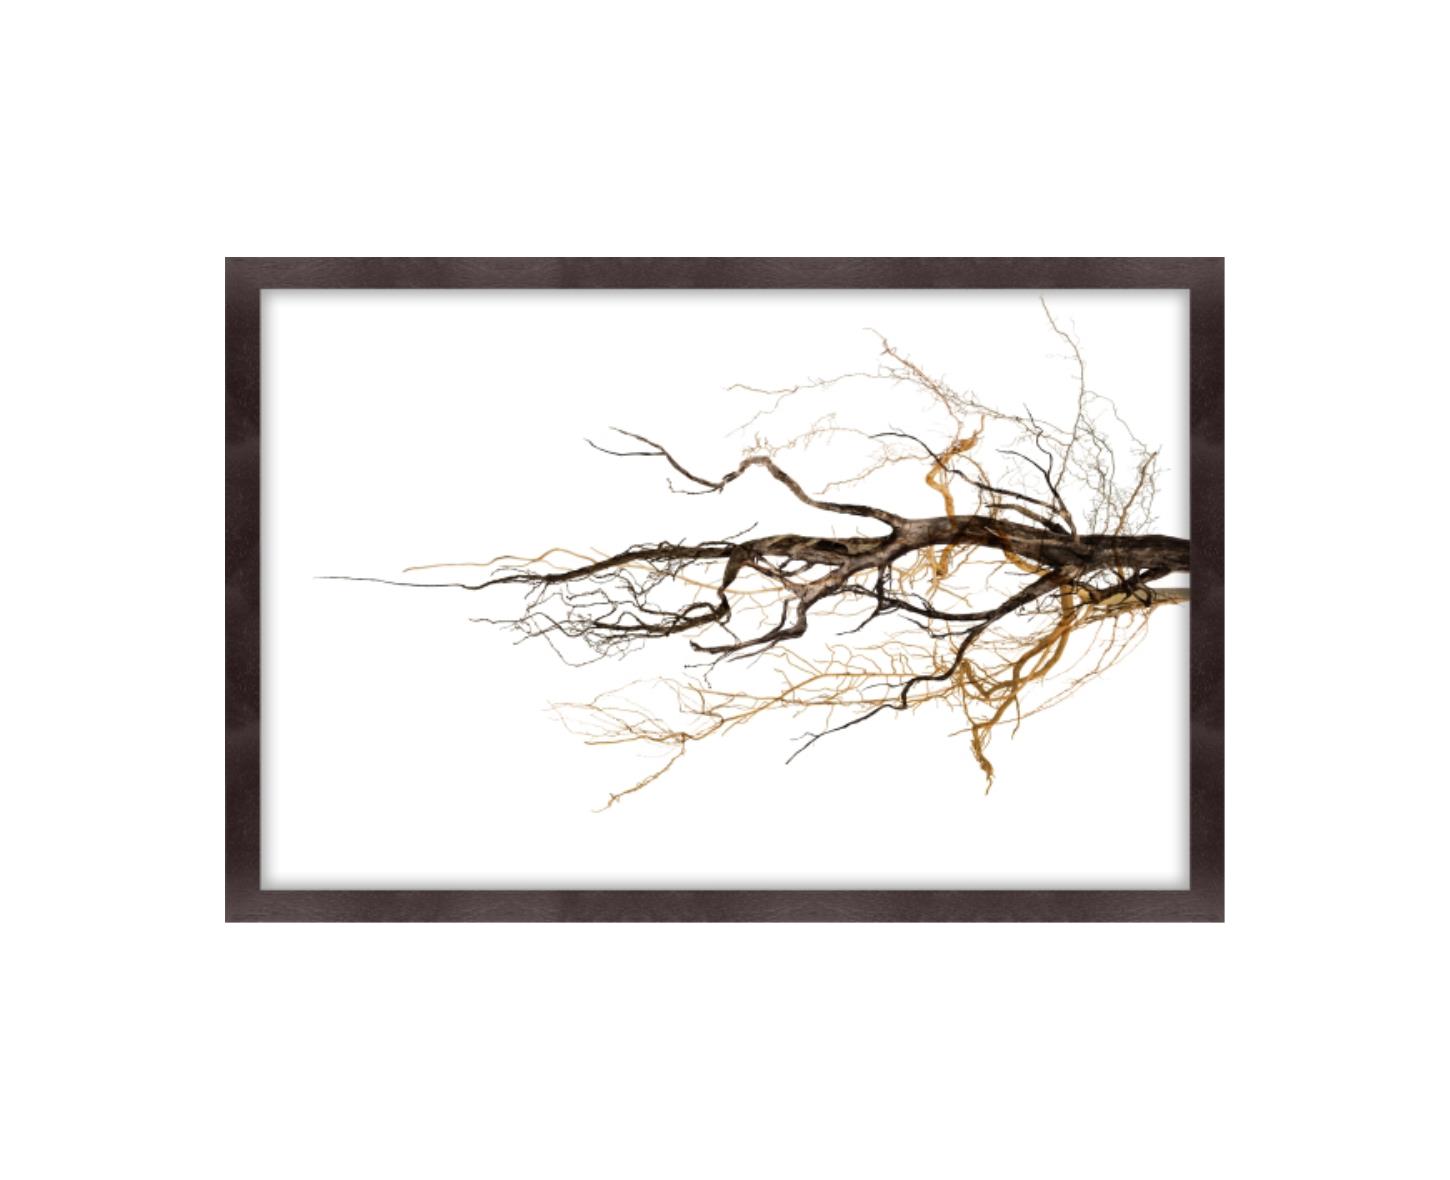 “Branches”-$1,365.00